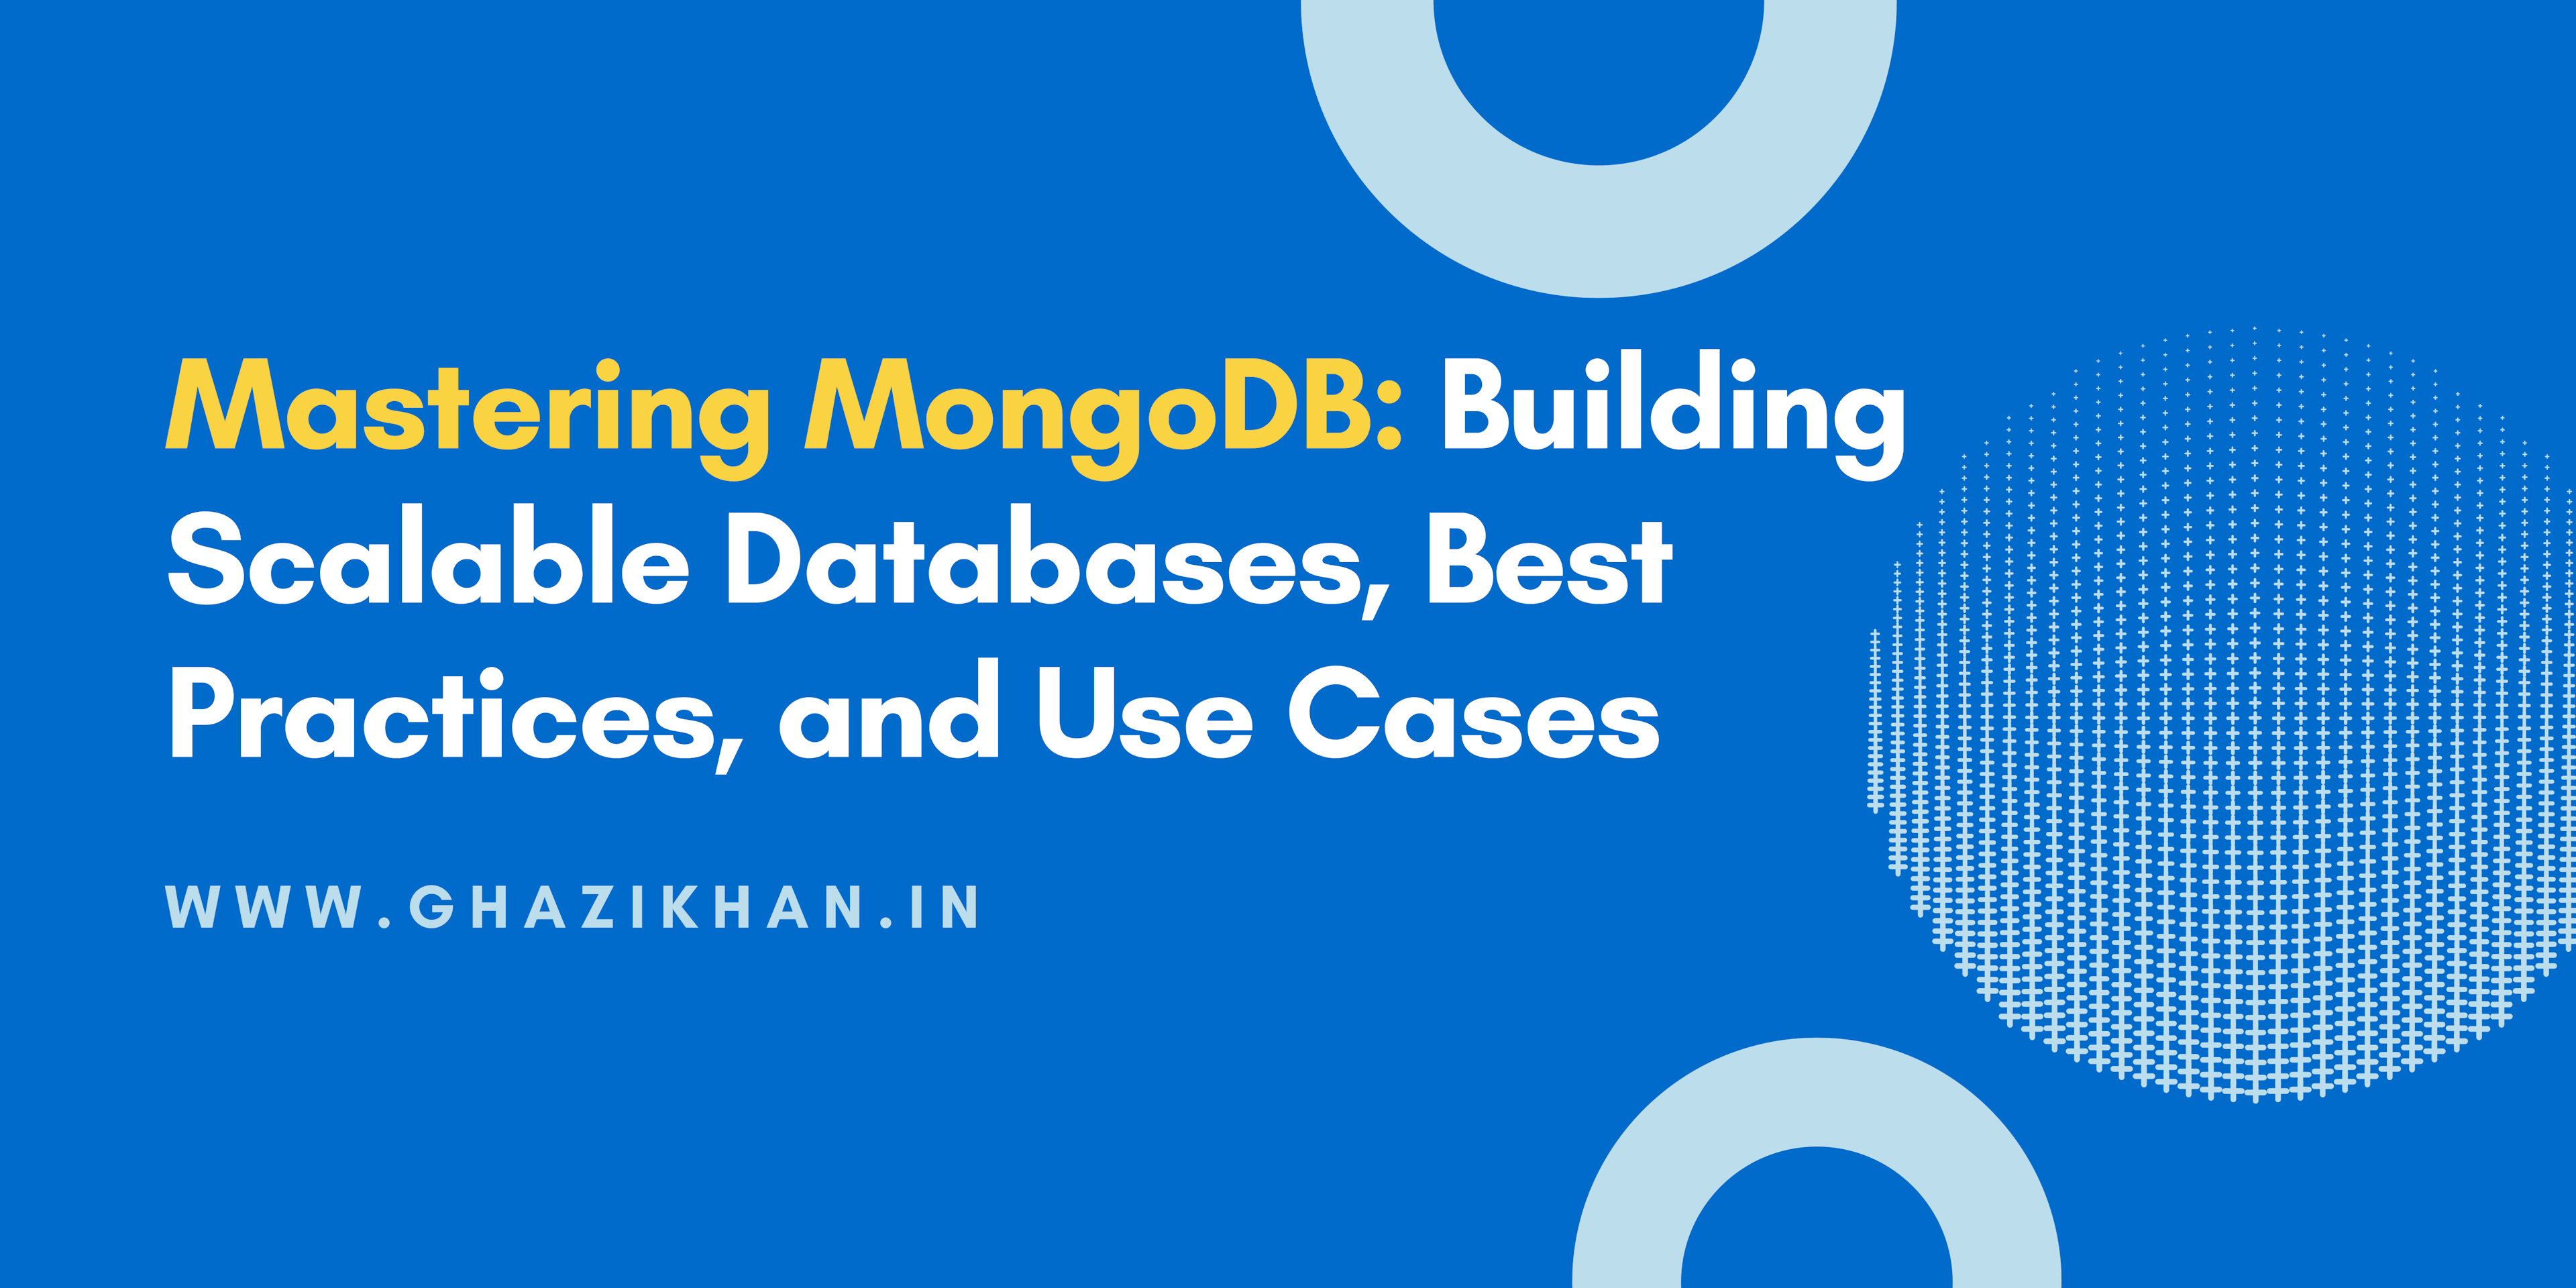 Mastering MongoDB: Building Scalable Databases, Best Practices, and Use Cases